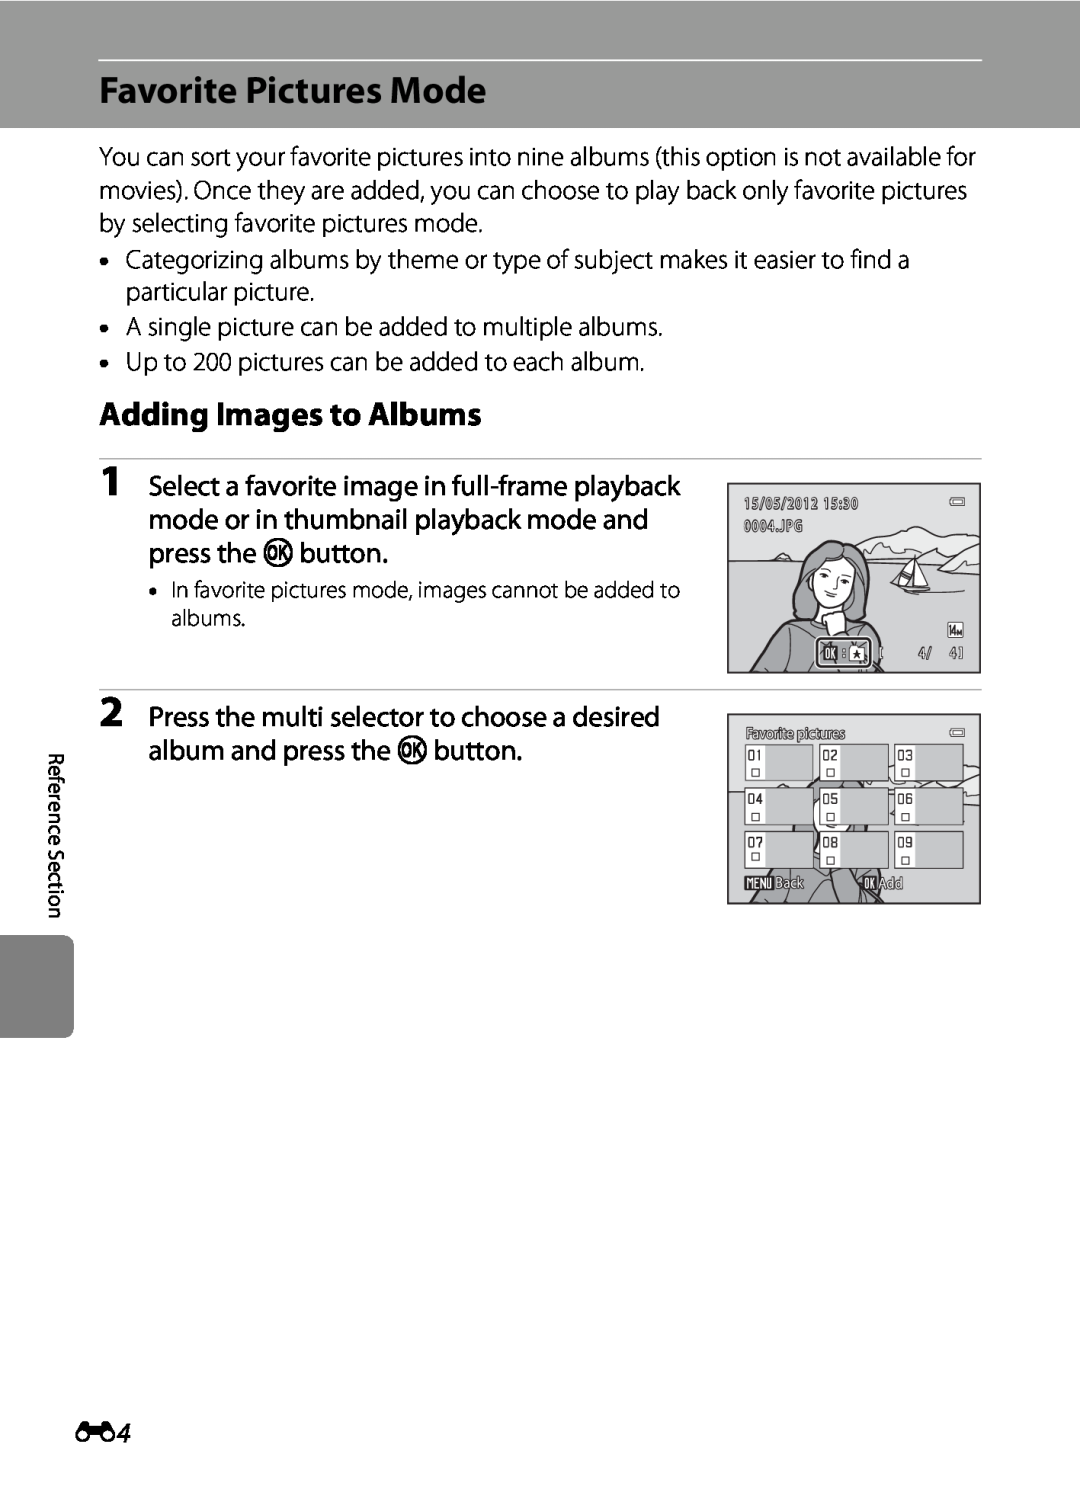 Nikon S2600 manual Favorite Pictures Mode, Adding Images to Albums, Select a favorite image in full-frame playback 